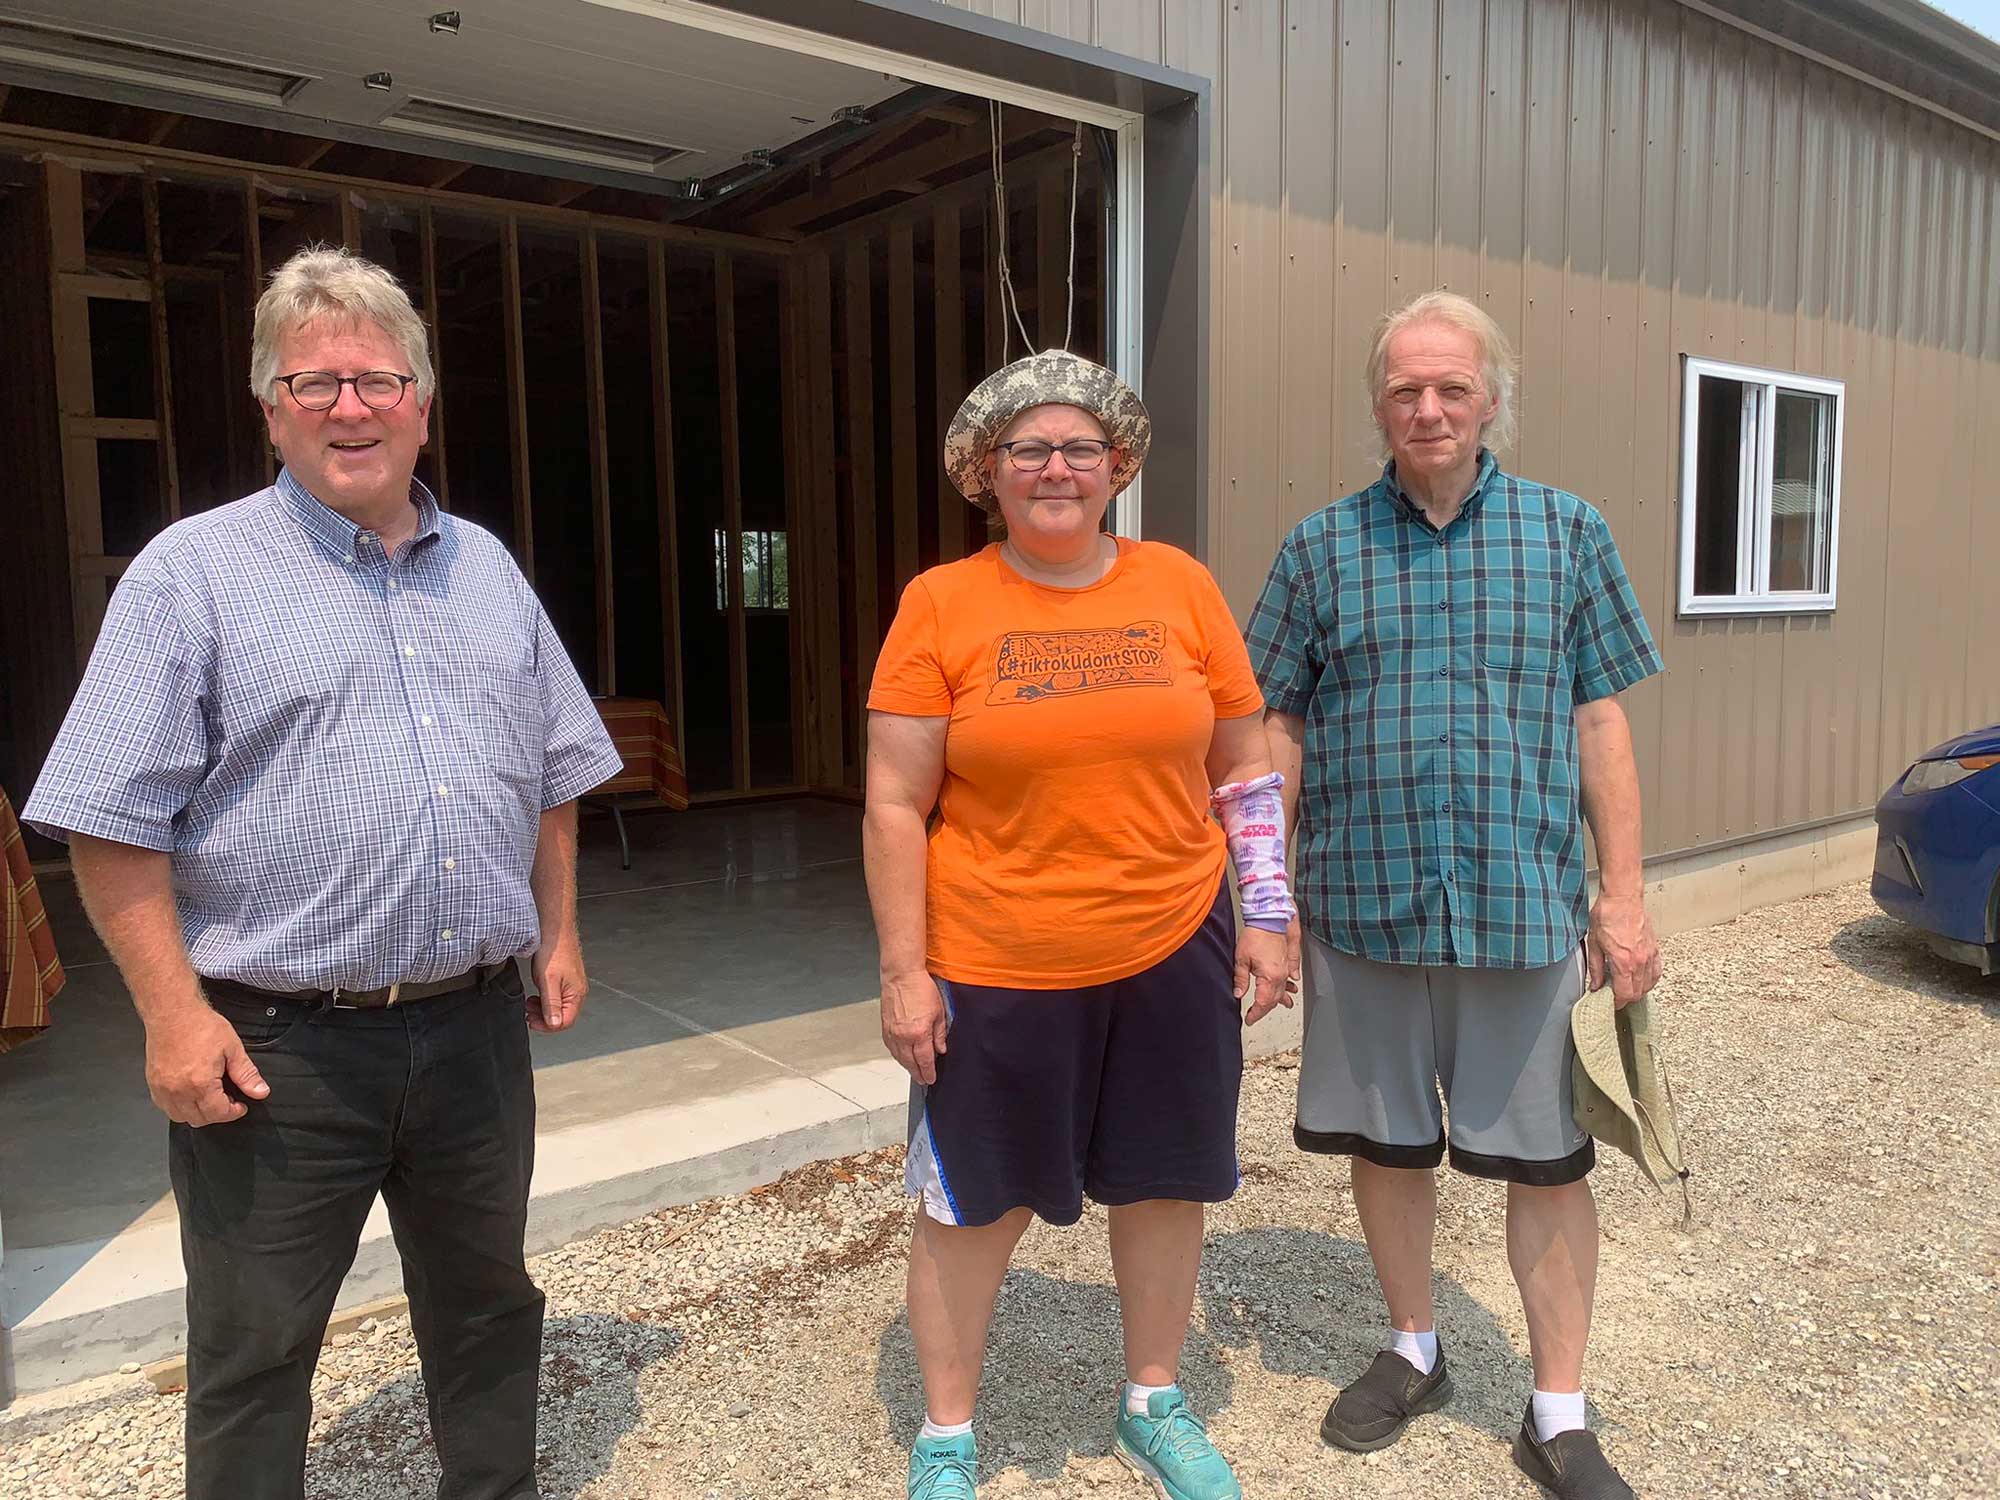 Monday, July 19, 2021 – Senator Robert Black meets Elisabeth Burrow and Mitja Kosir at Jewels Under the Kilt in Wellington County, where he learned about tree nut farming and processing.